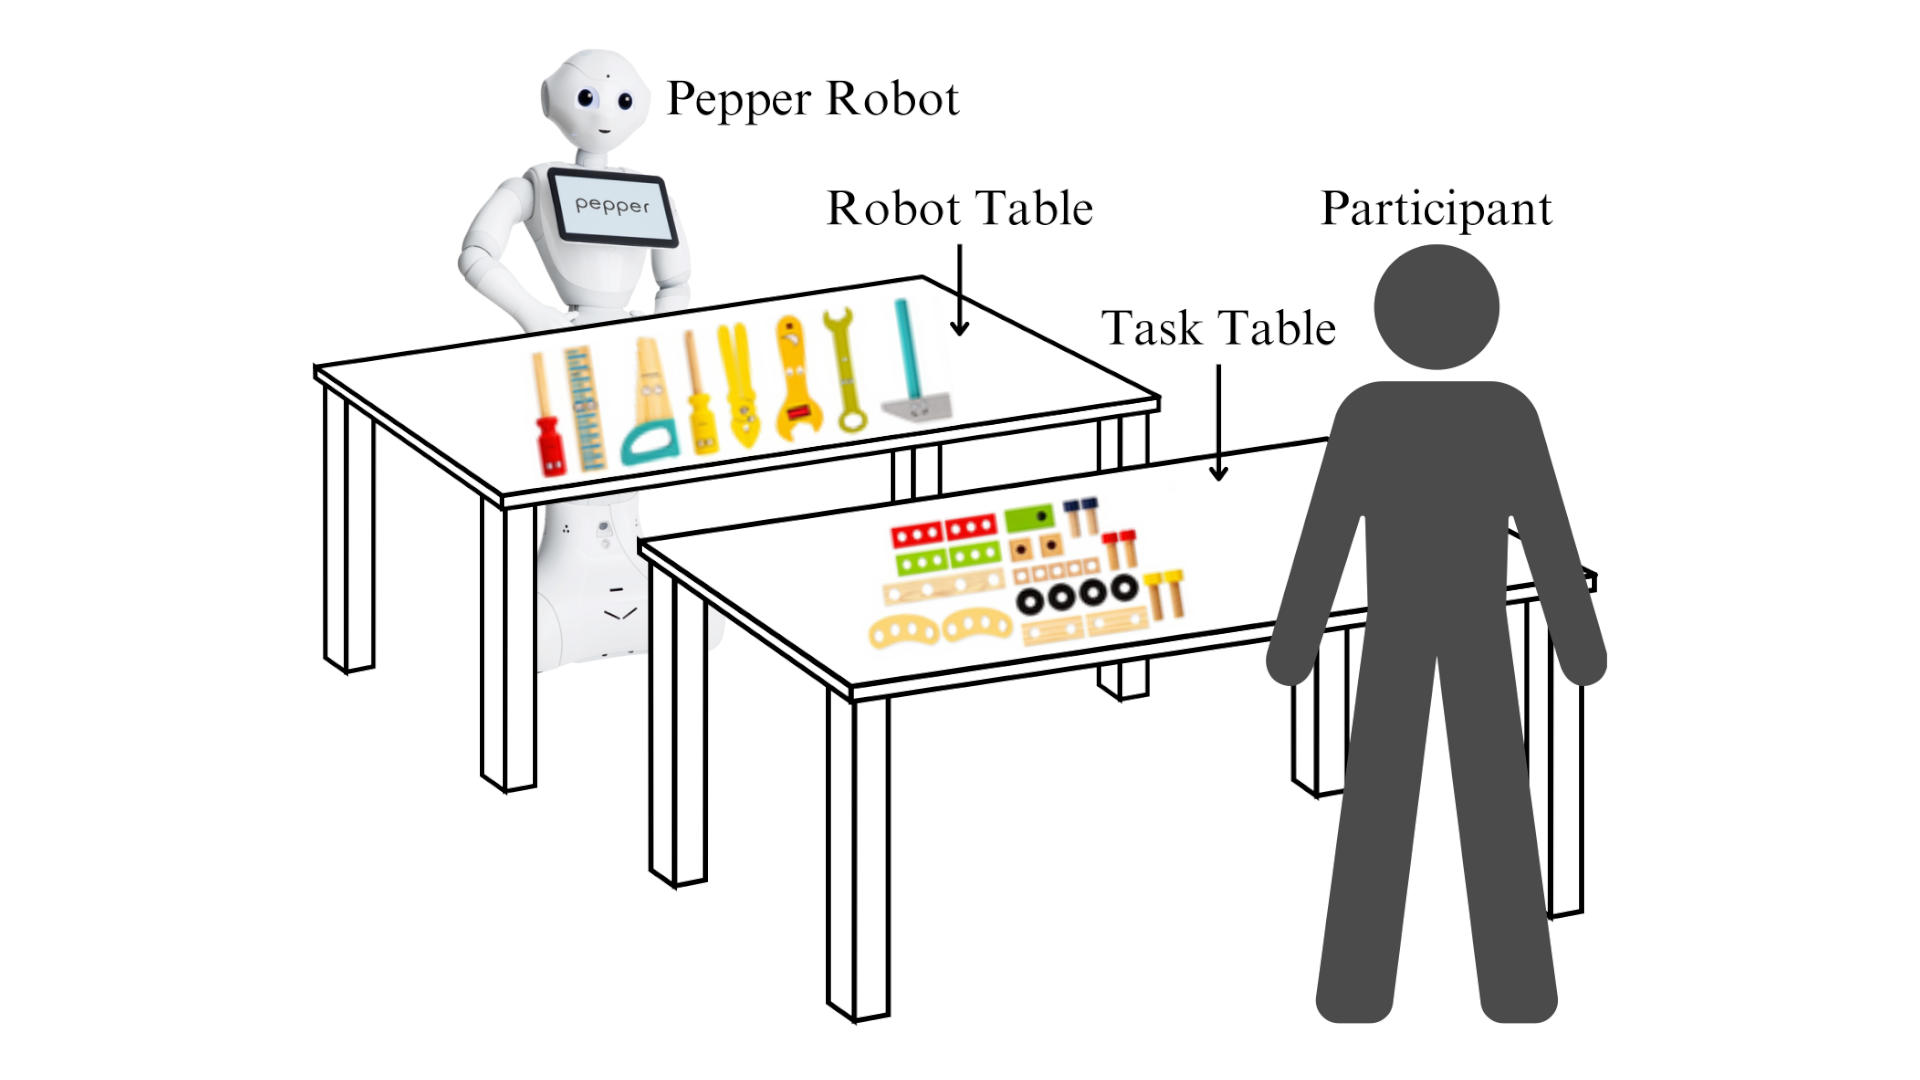 To Understand Indicators of Robots’ Vision Capabilities